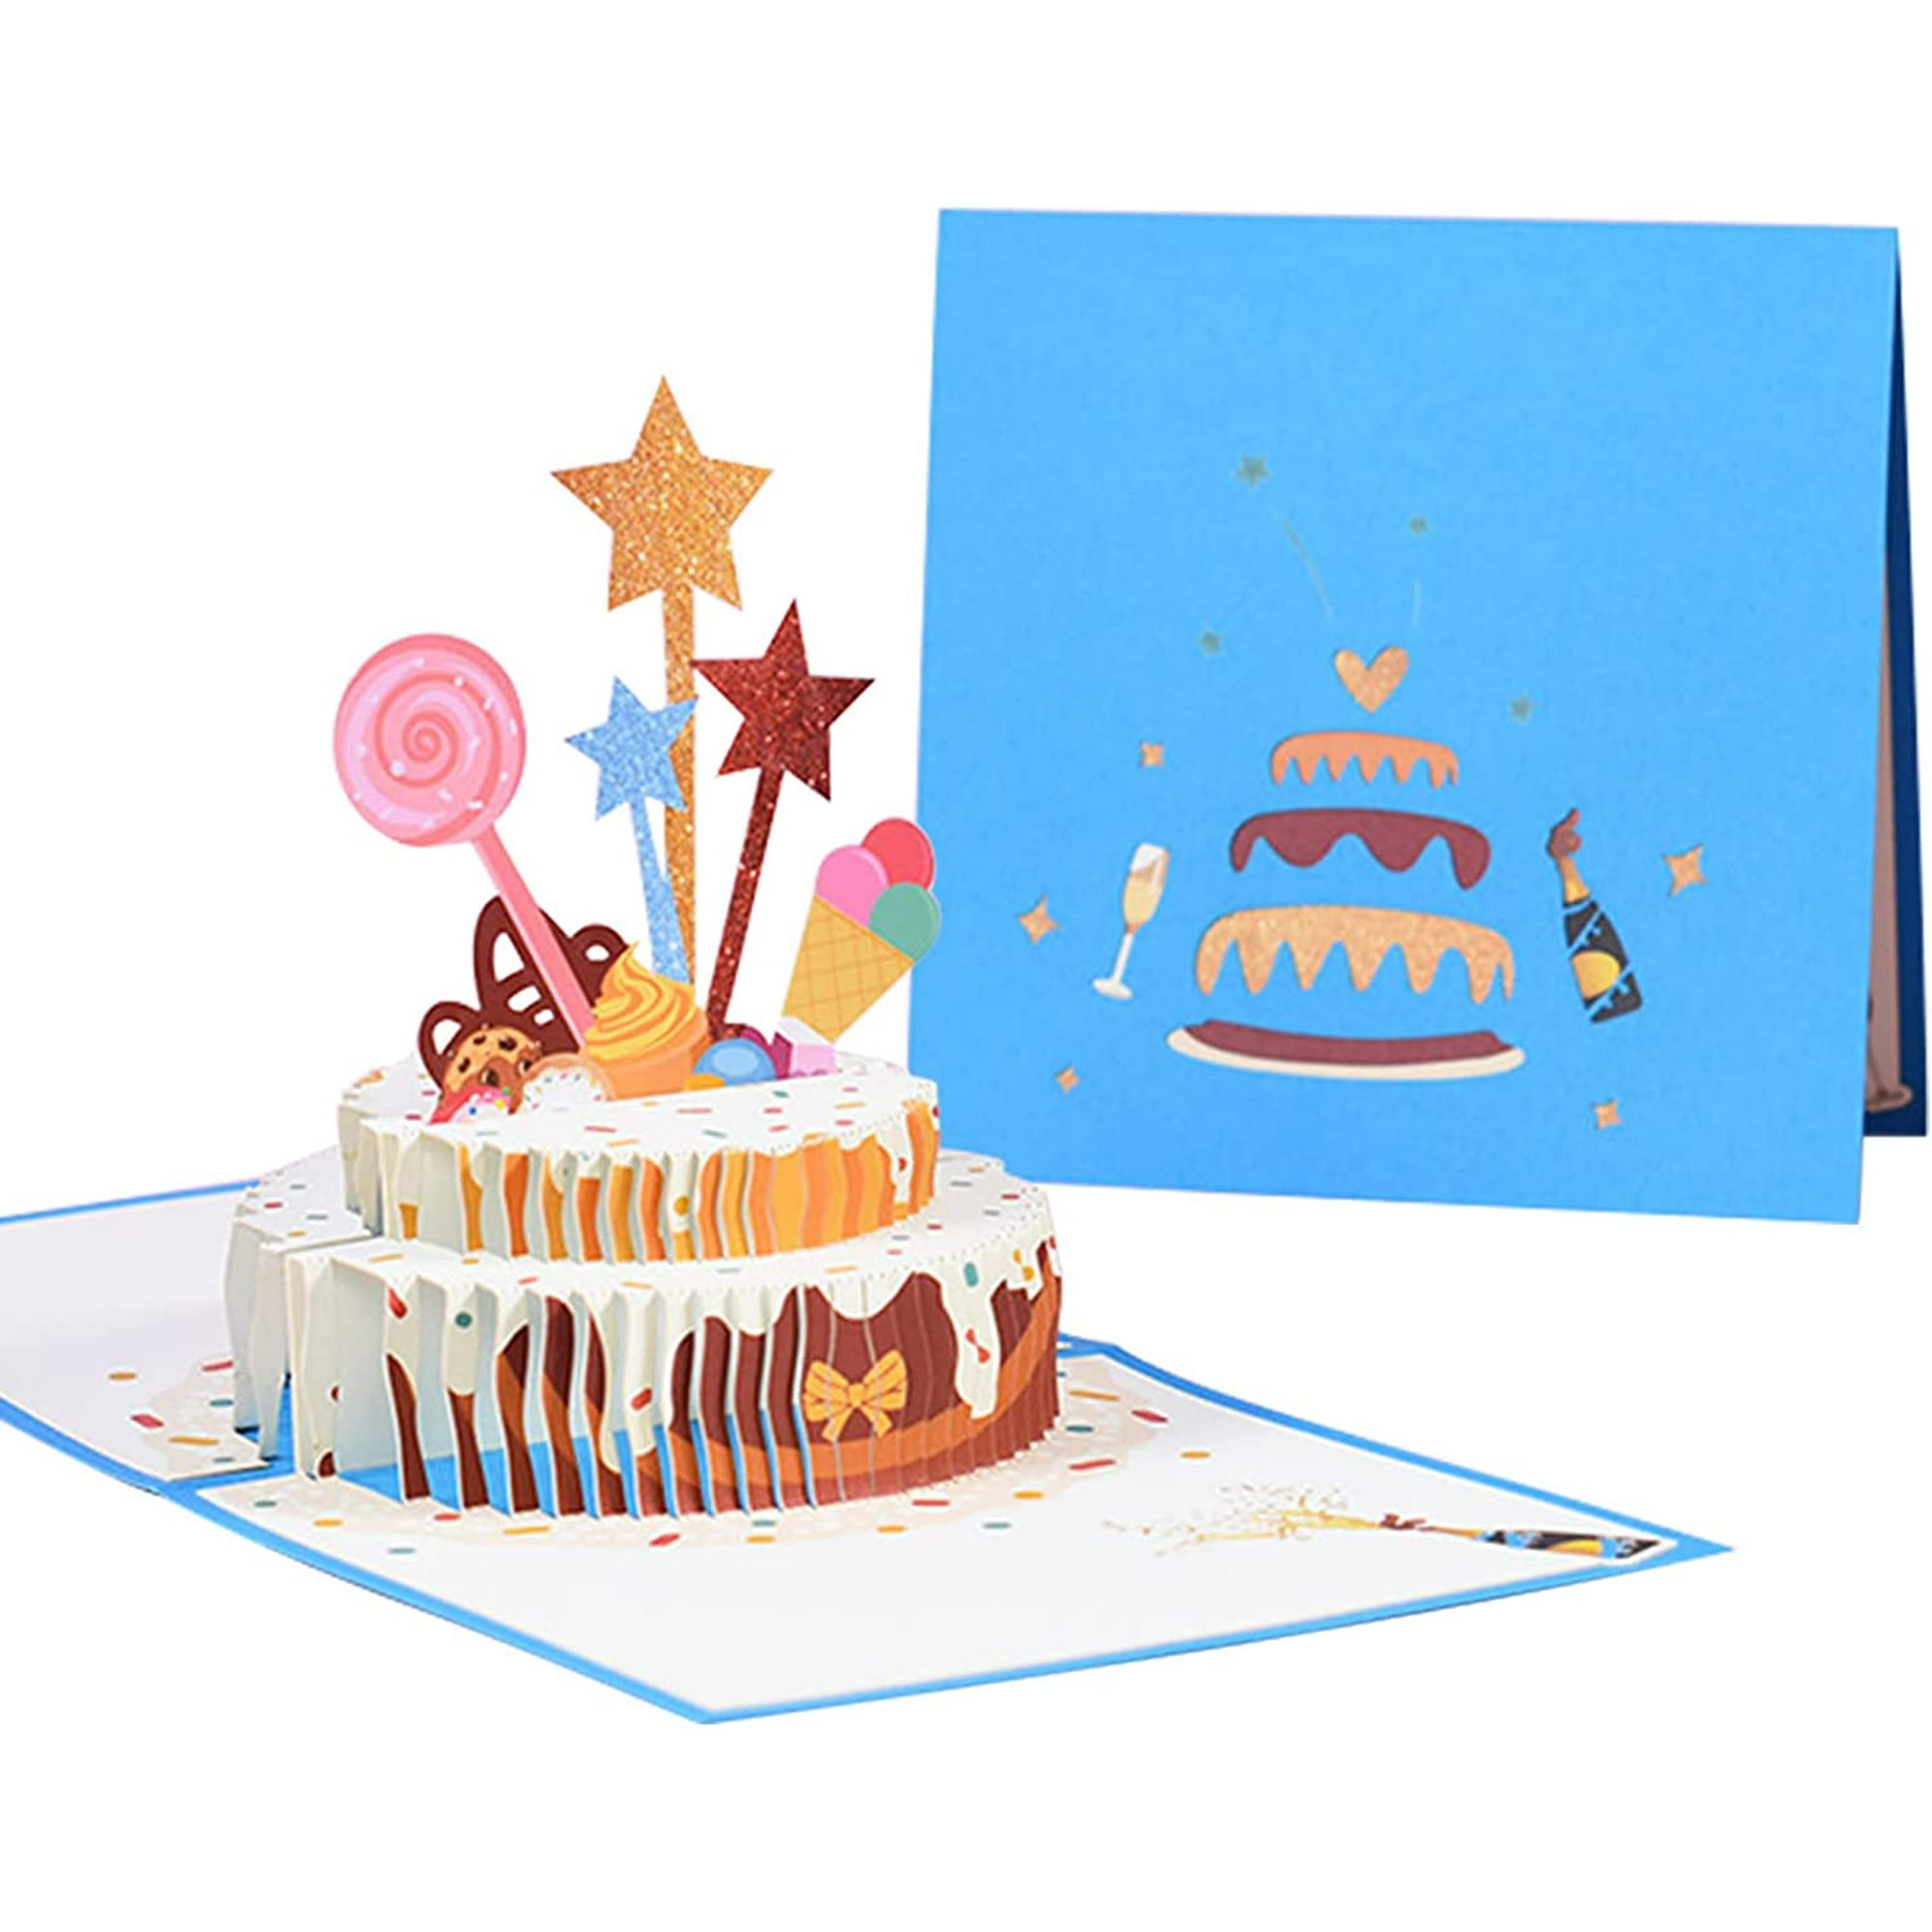 3D Pop Up Birthday Card, Happy Birthday Greeting Cards, Novelty Design  Funny Birthday Gift Card, Sympathy Cards for Her Him Mom Friends Kids  Children Sister Wife Families Party - Blue Cake |